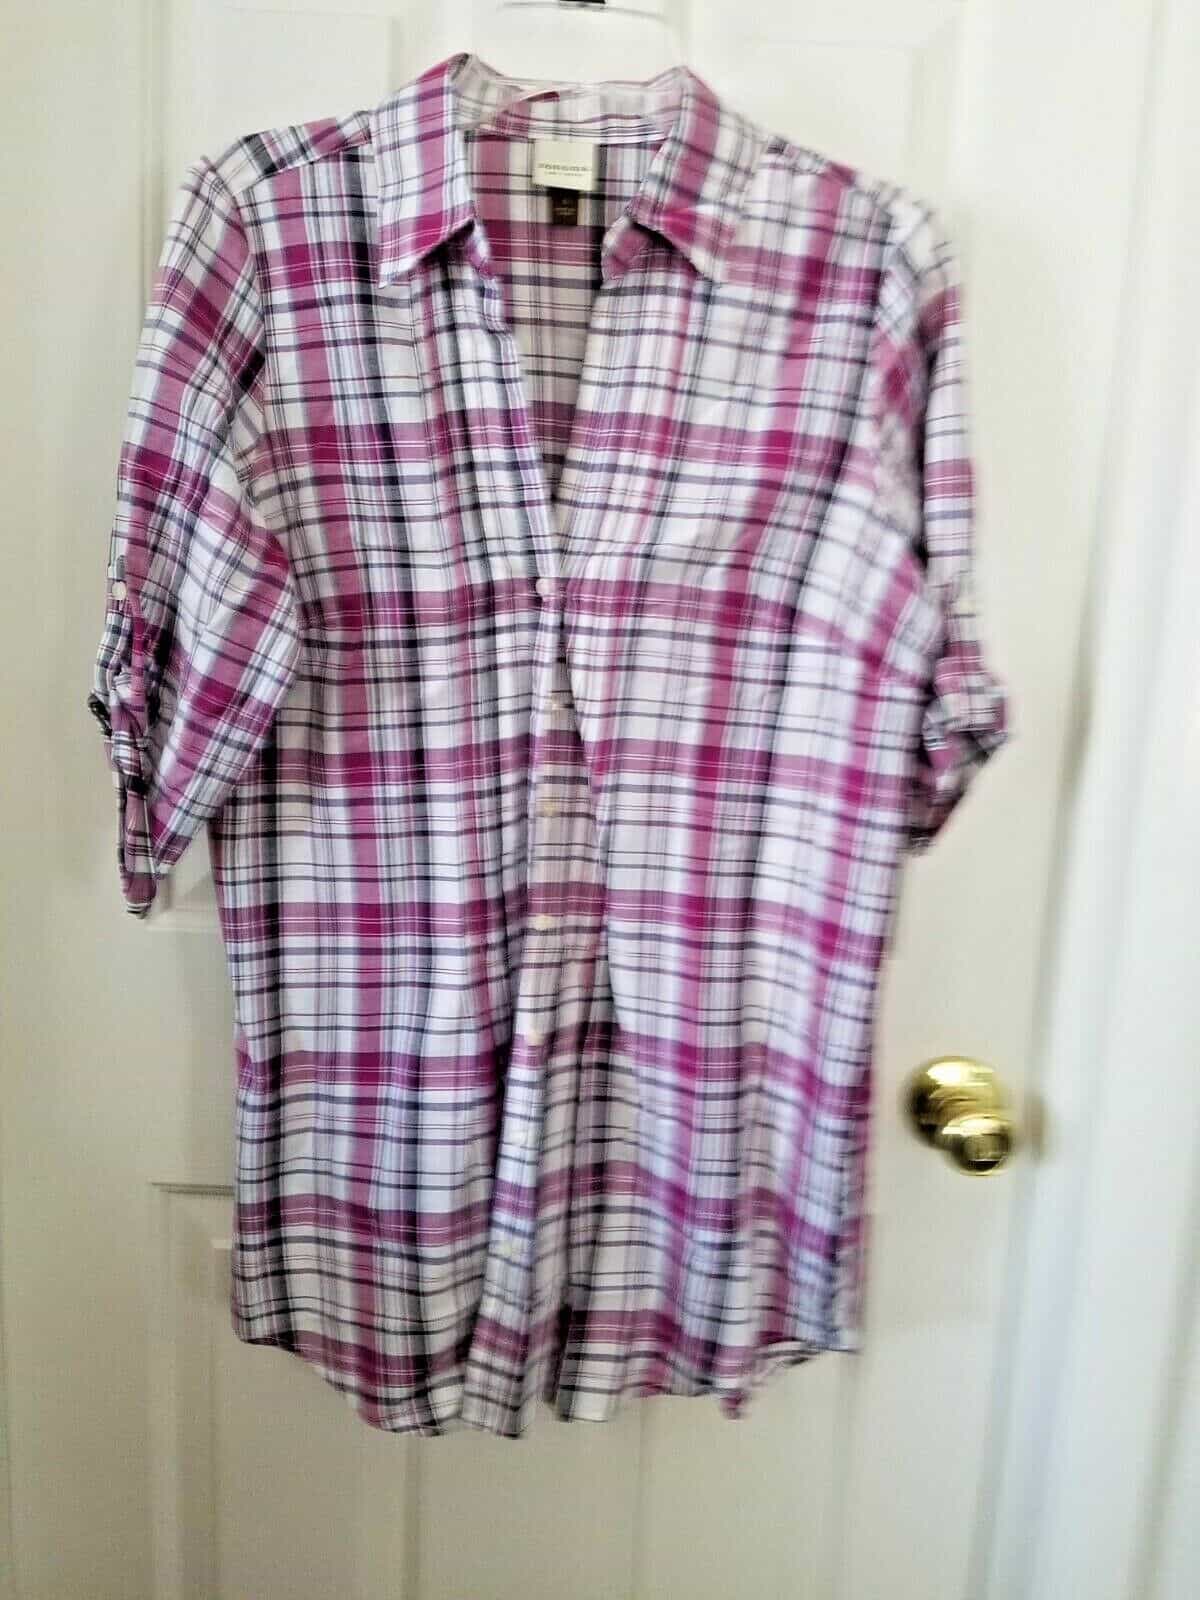 Women's Sonoma Brand Plaid Top With Matching Tank Top Size